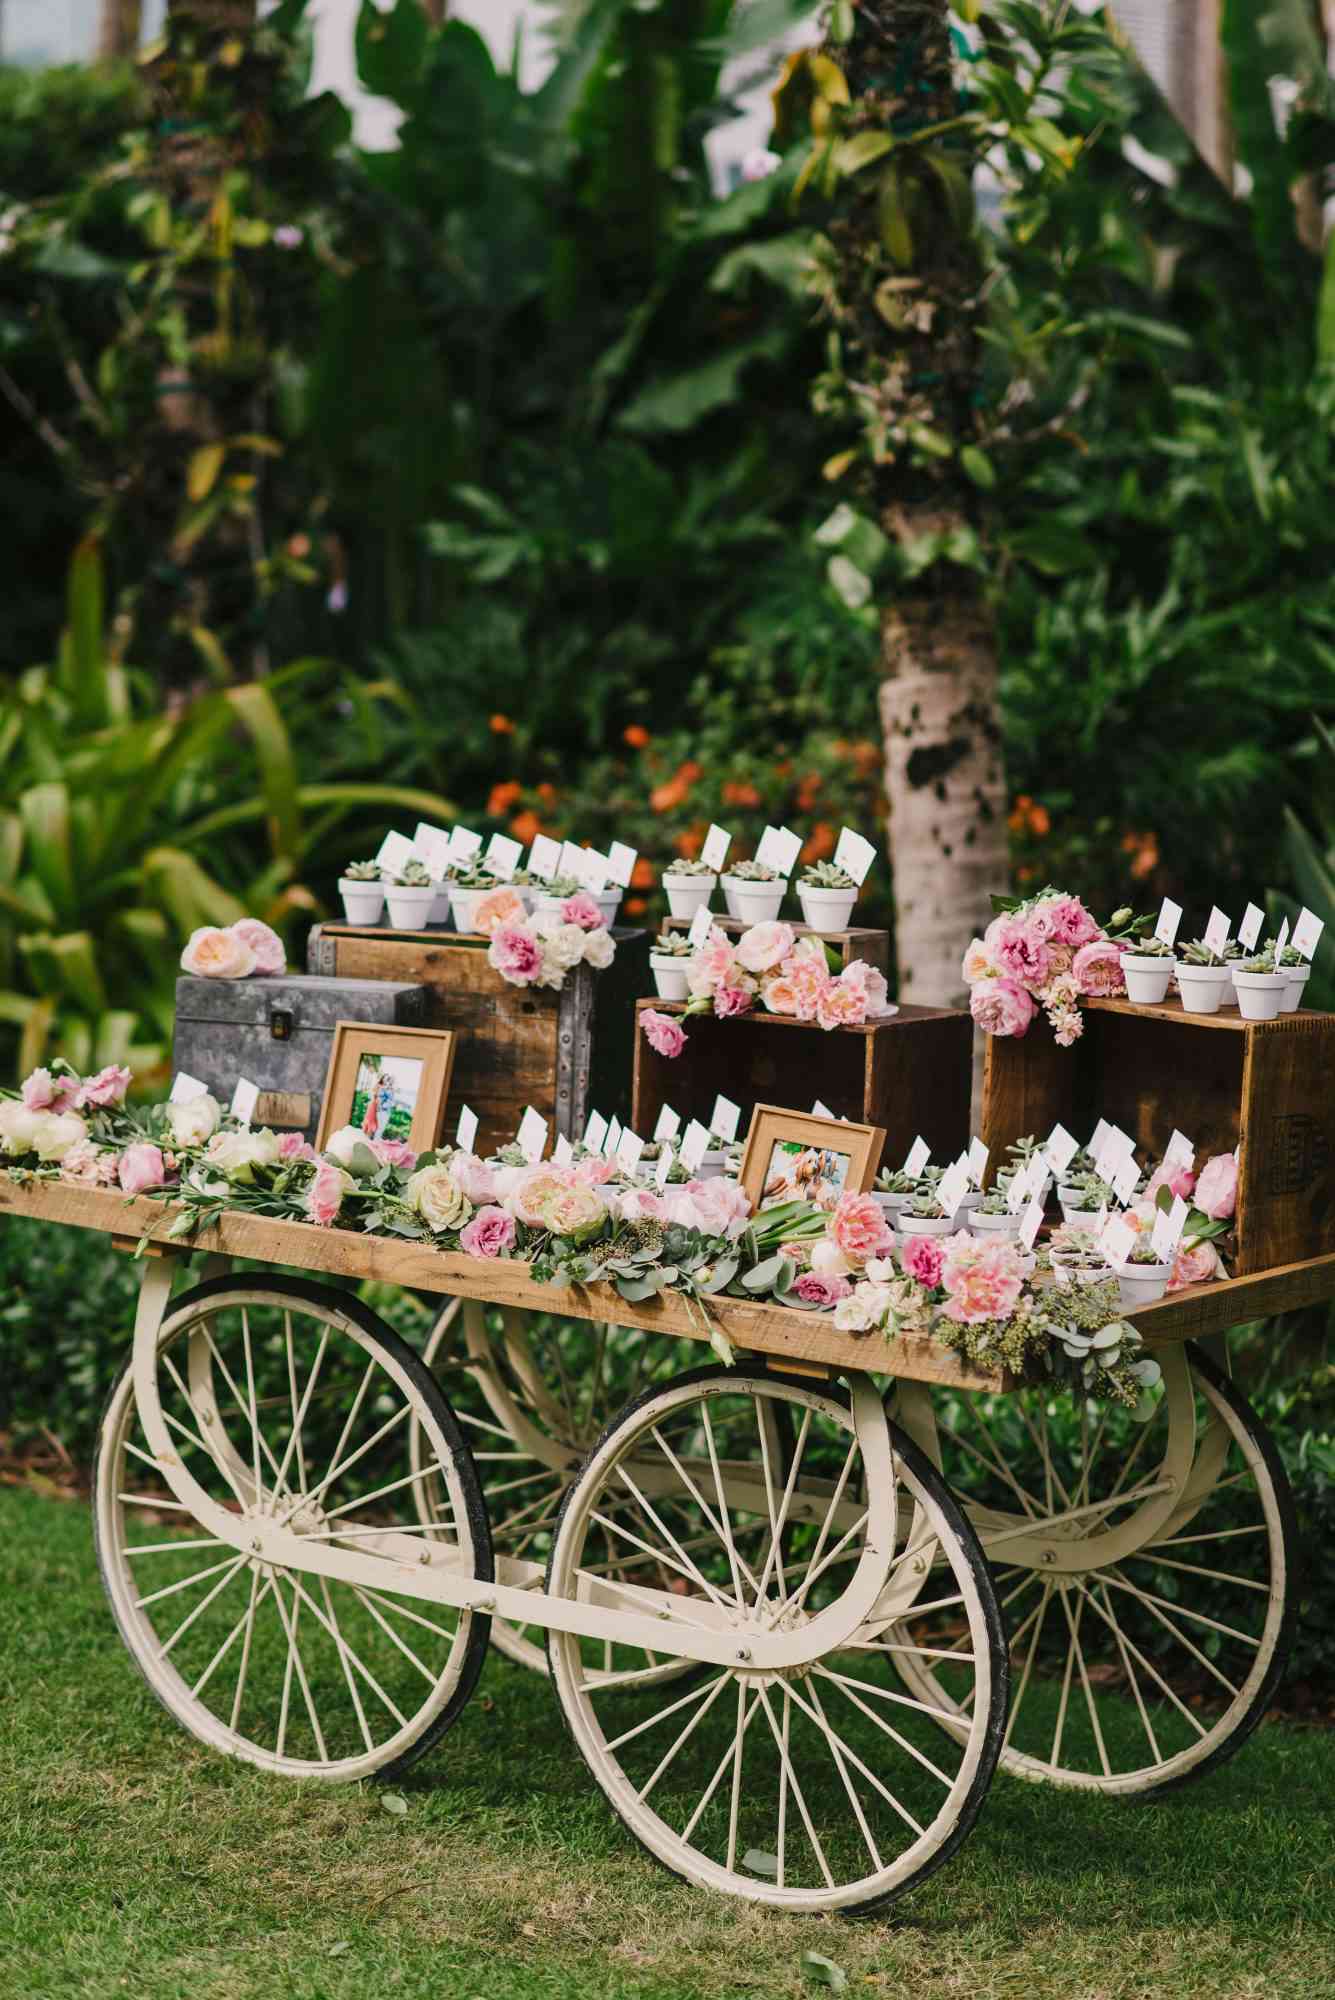 50 Creative Wedding Favors That Will Delight Your Guests | Martha Stewart